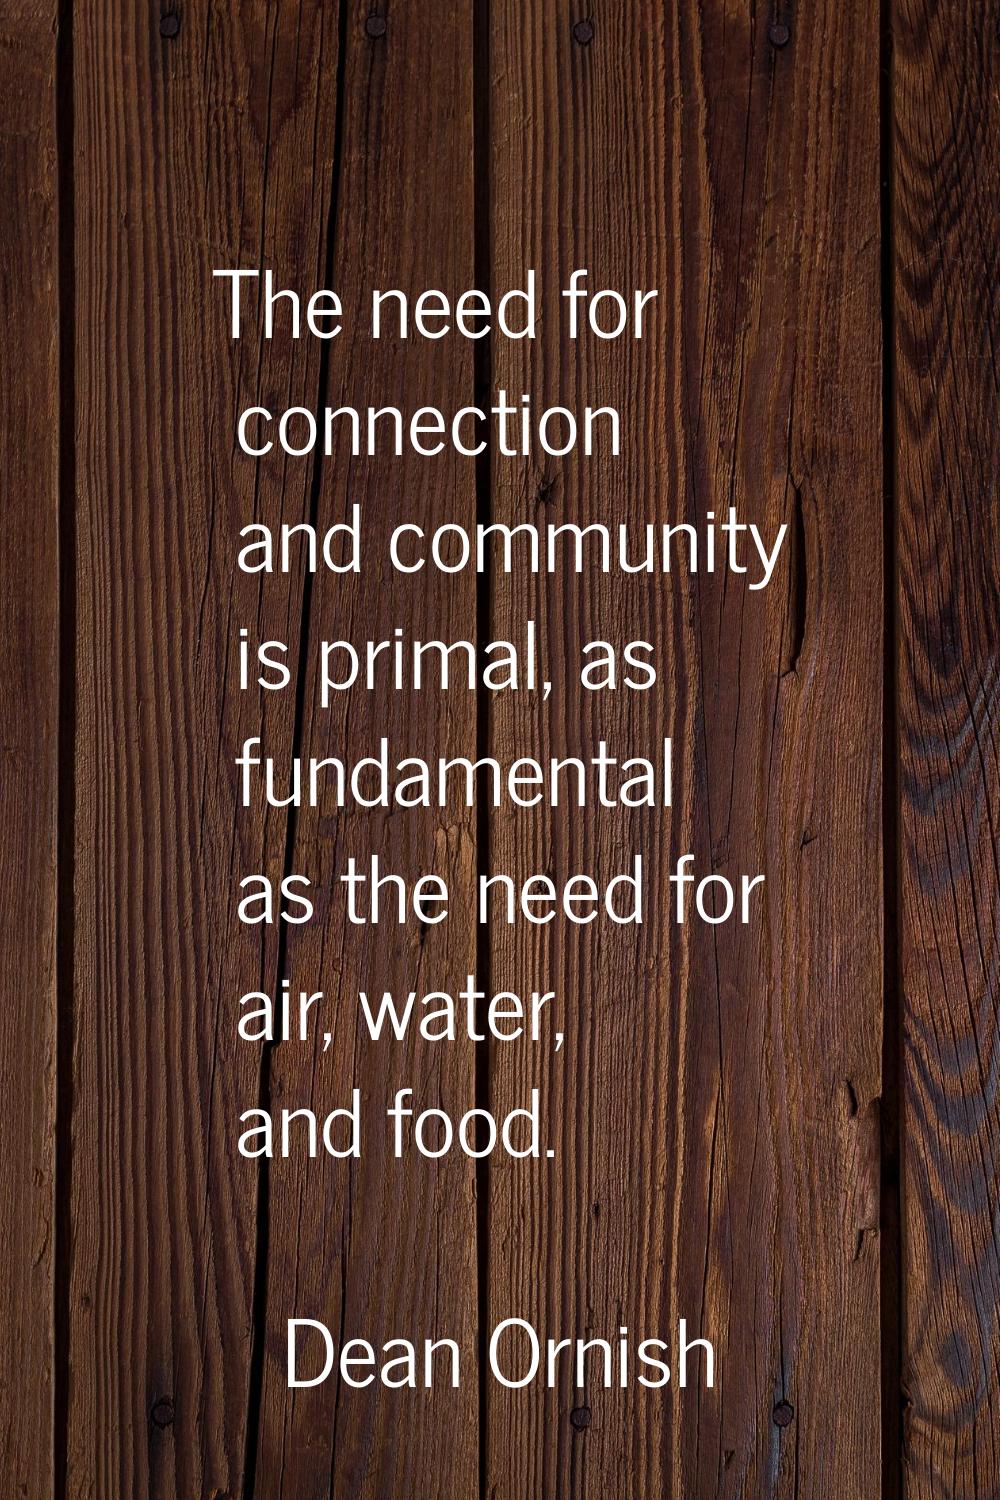 The need for connection and community is primal, as fundamental as the need for air, water, and foo